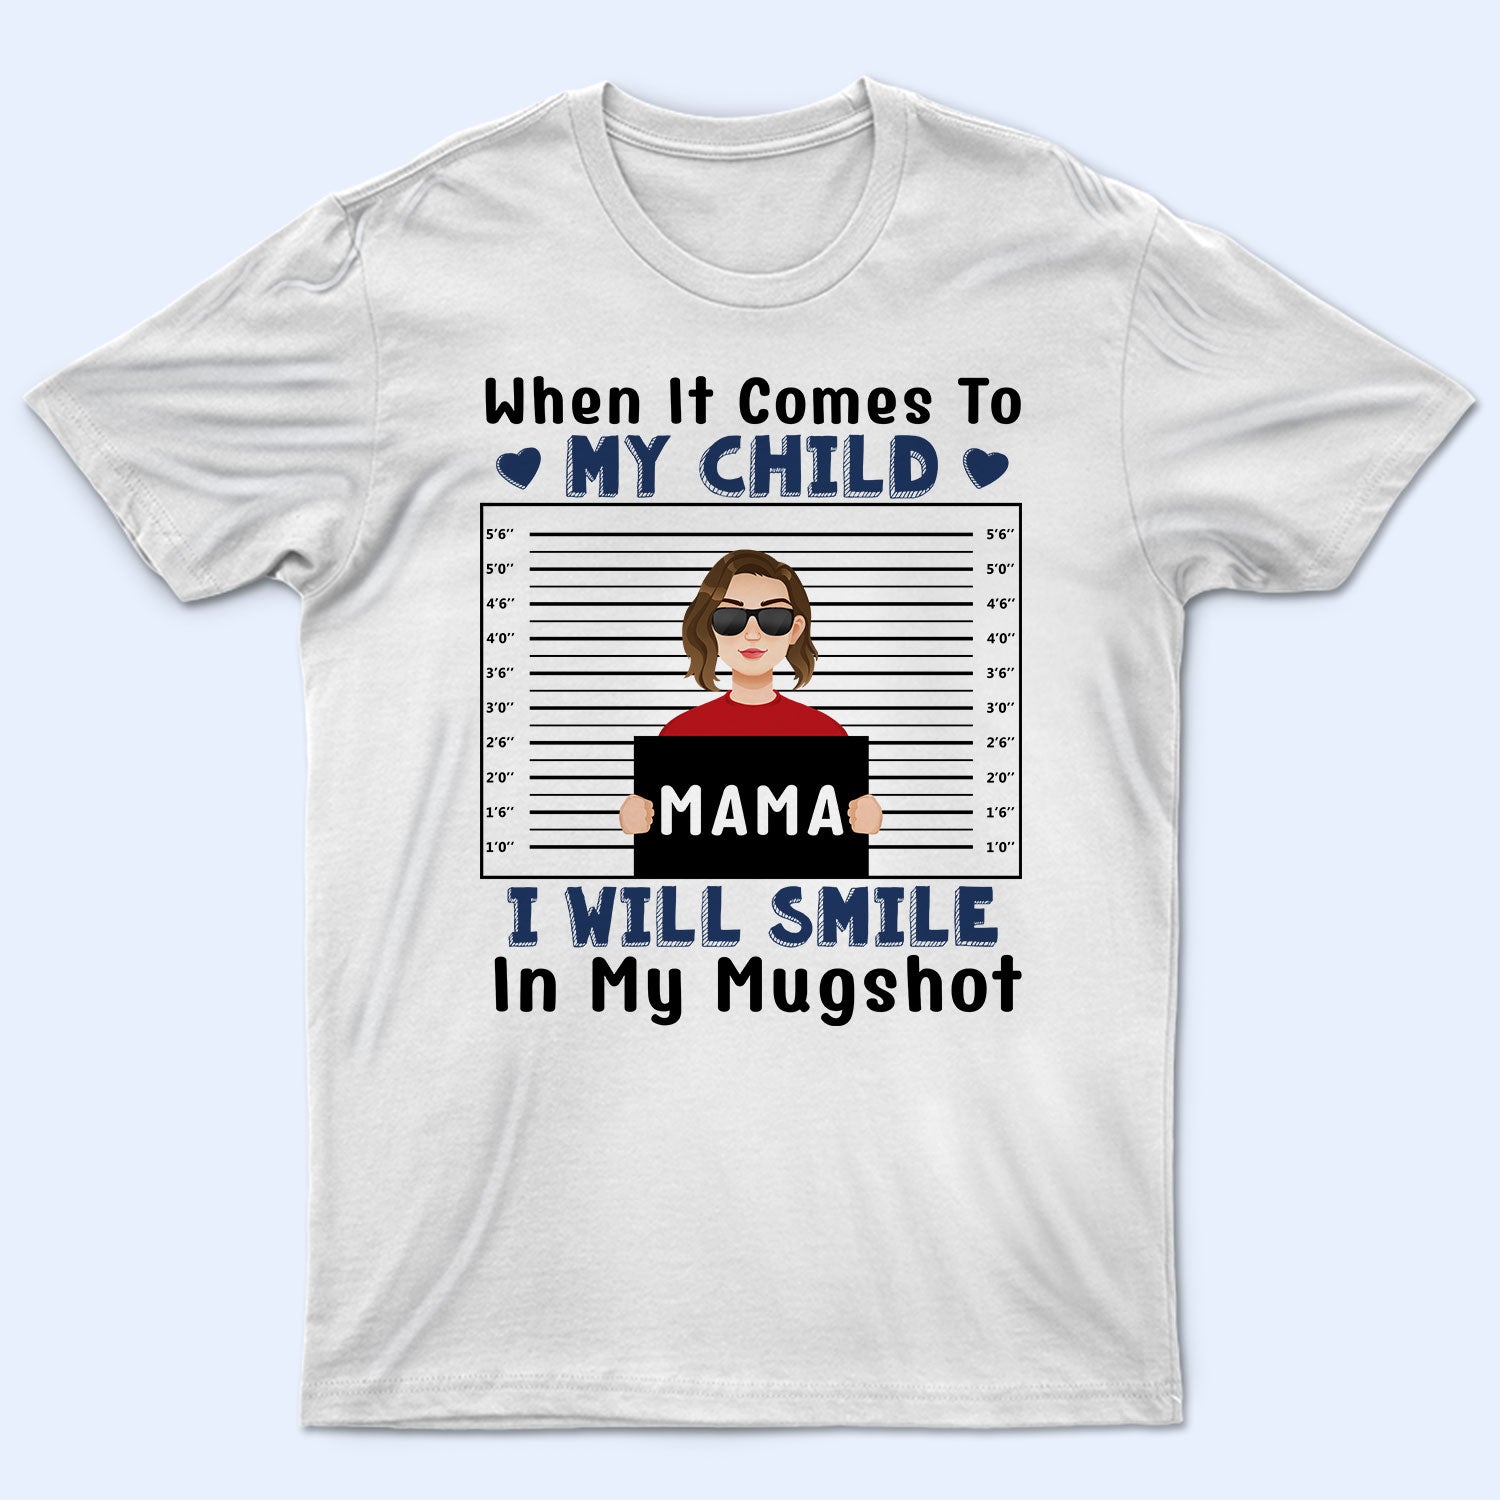 Smile In My Mugshot - Gift For Mother - Personalized T Shirt